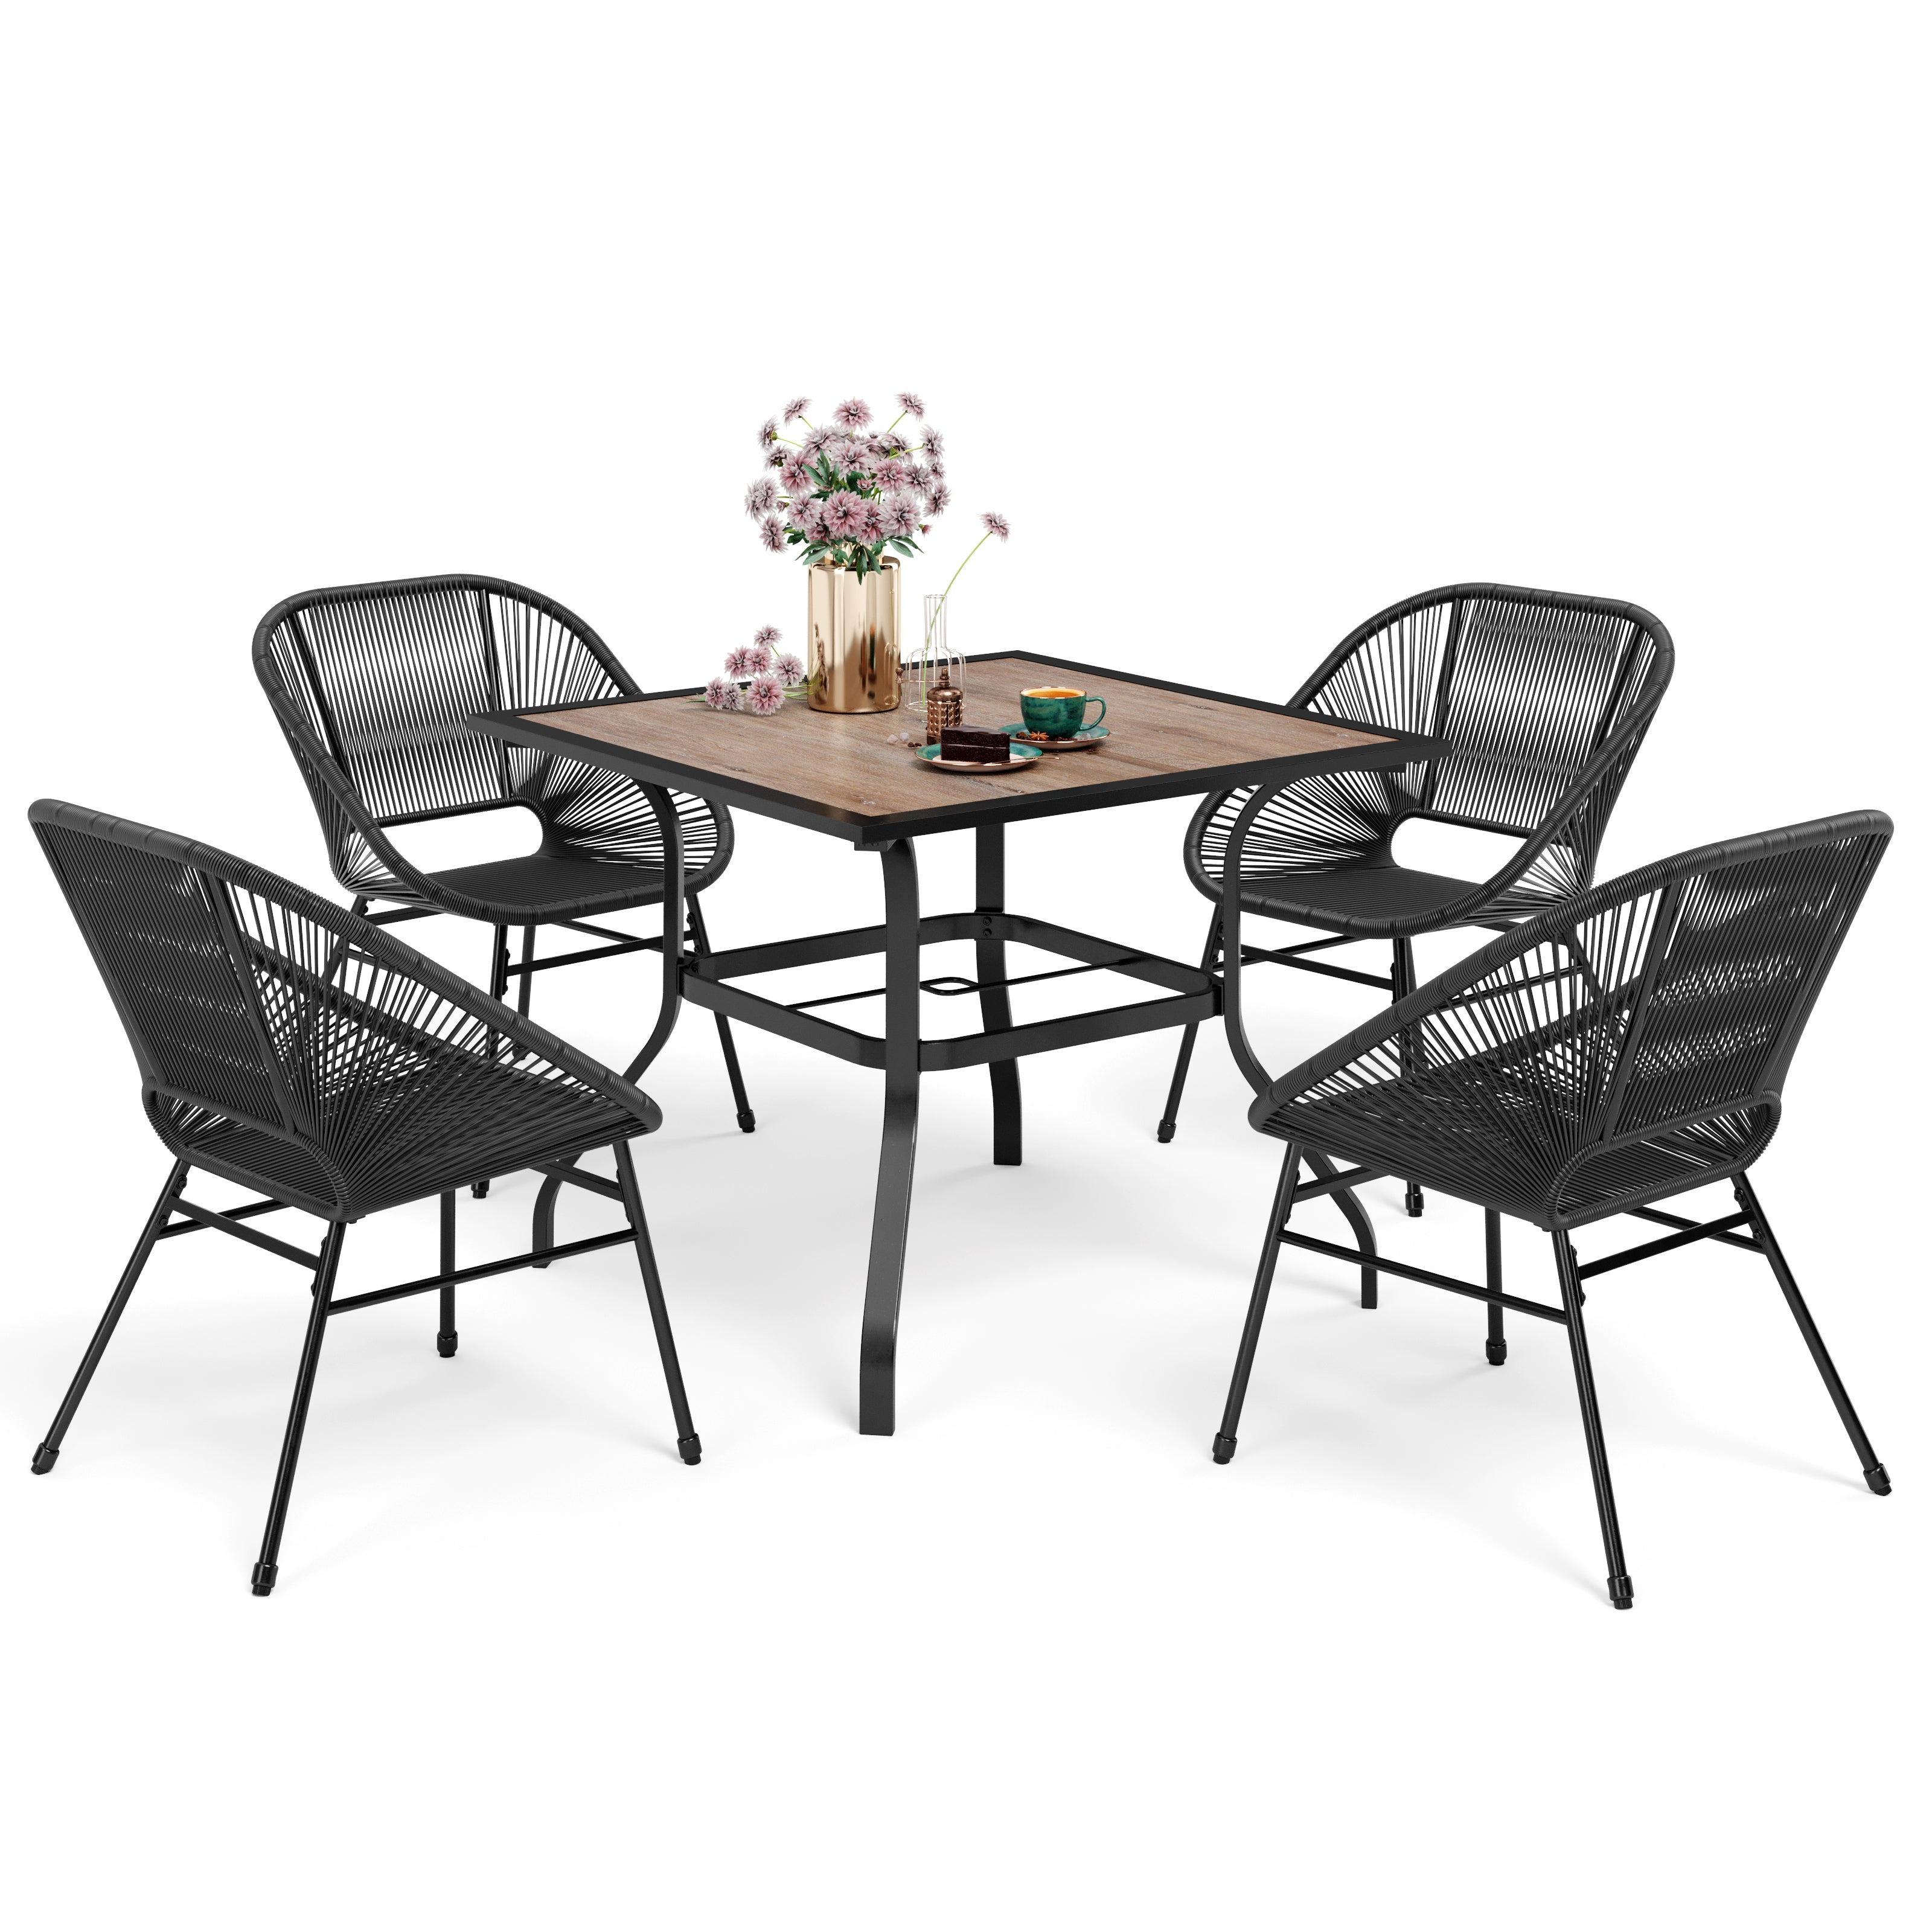 Sophia & William 5 Piece Patio Dining Set Black Frame Table Woven Rattan Chairs